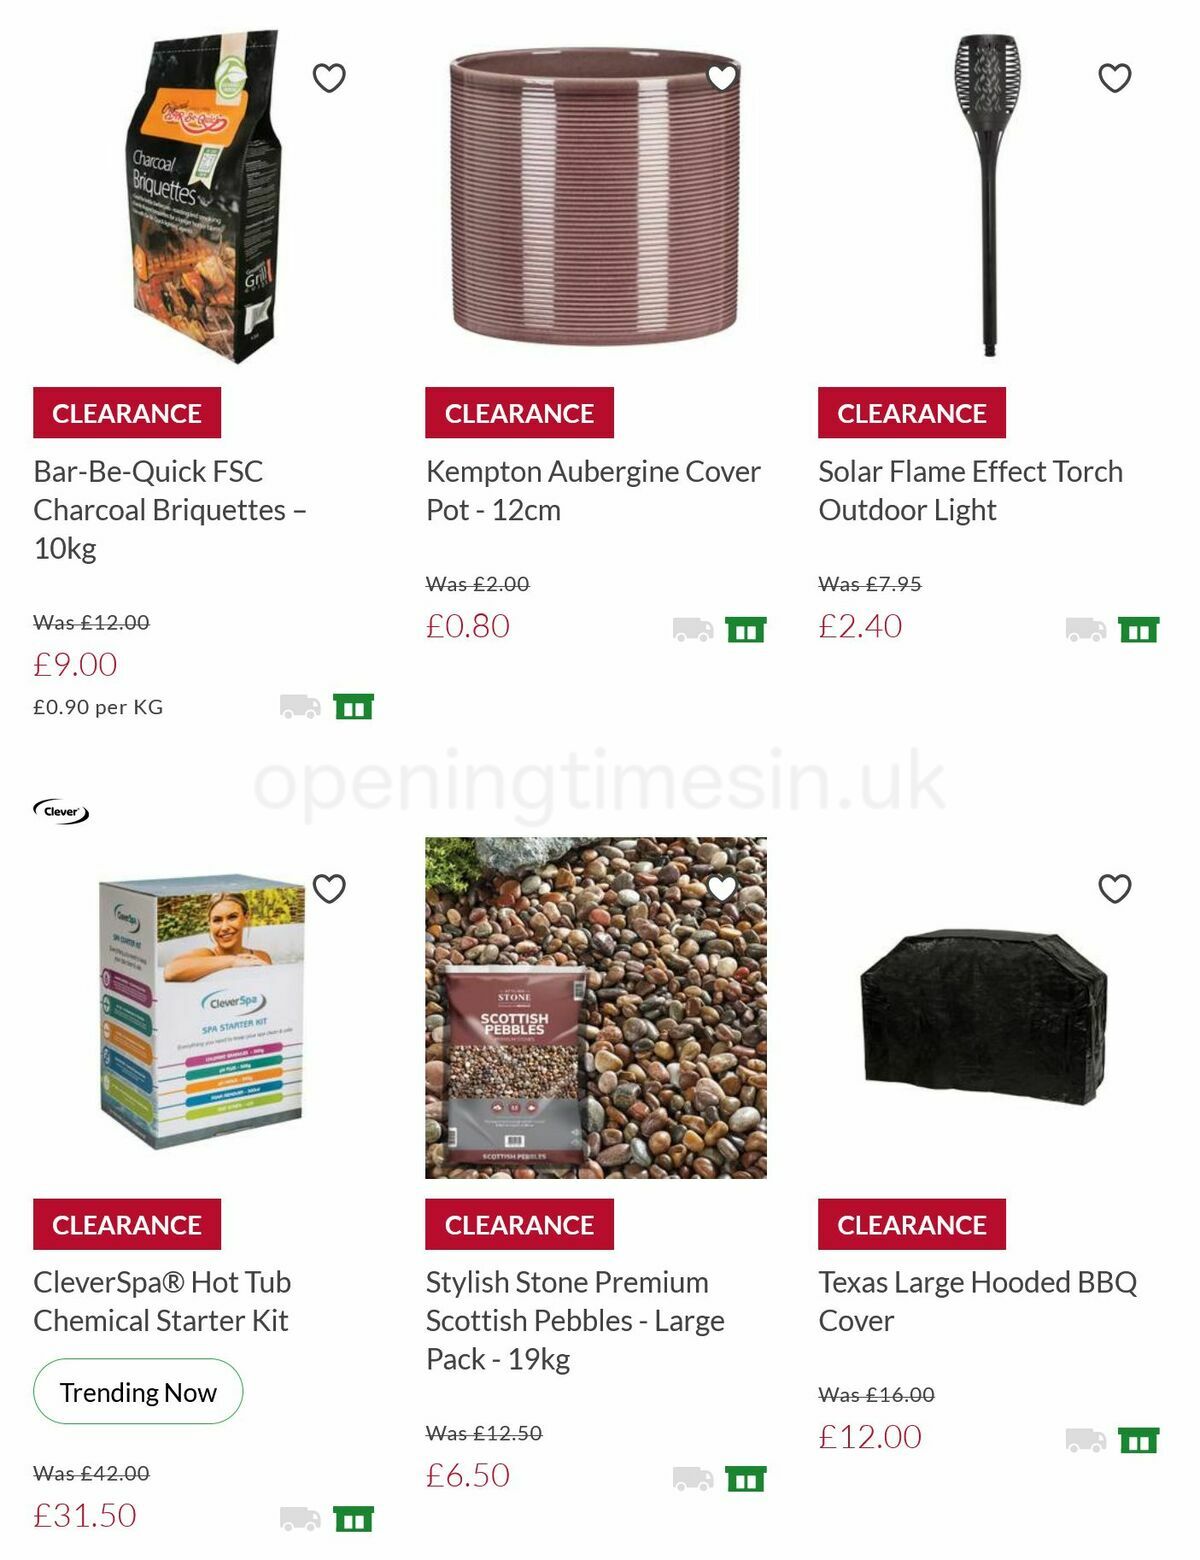 Homebase Offers from 1 July